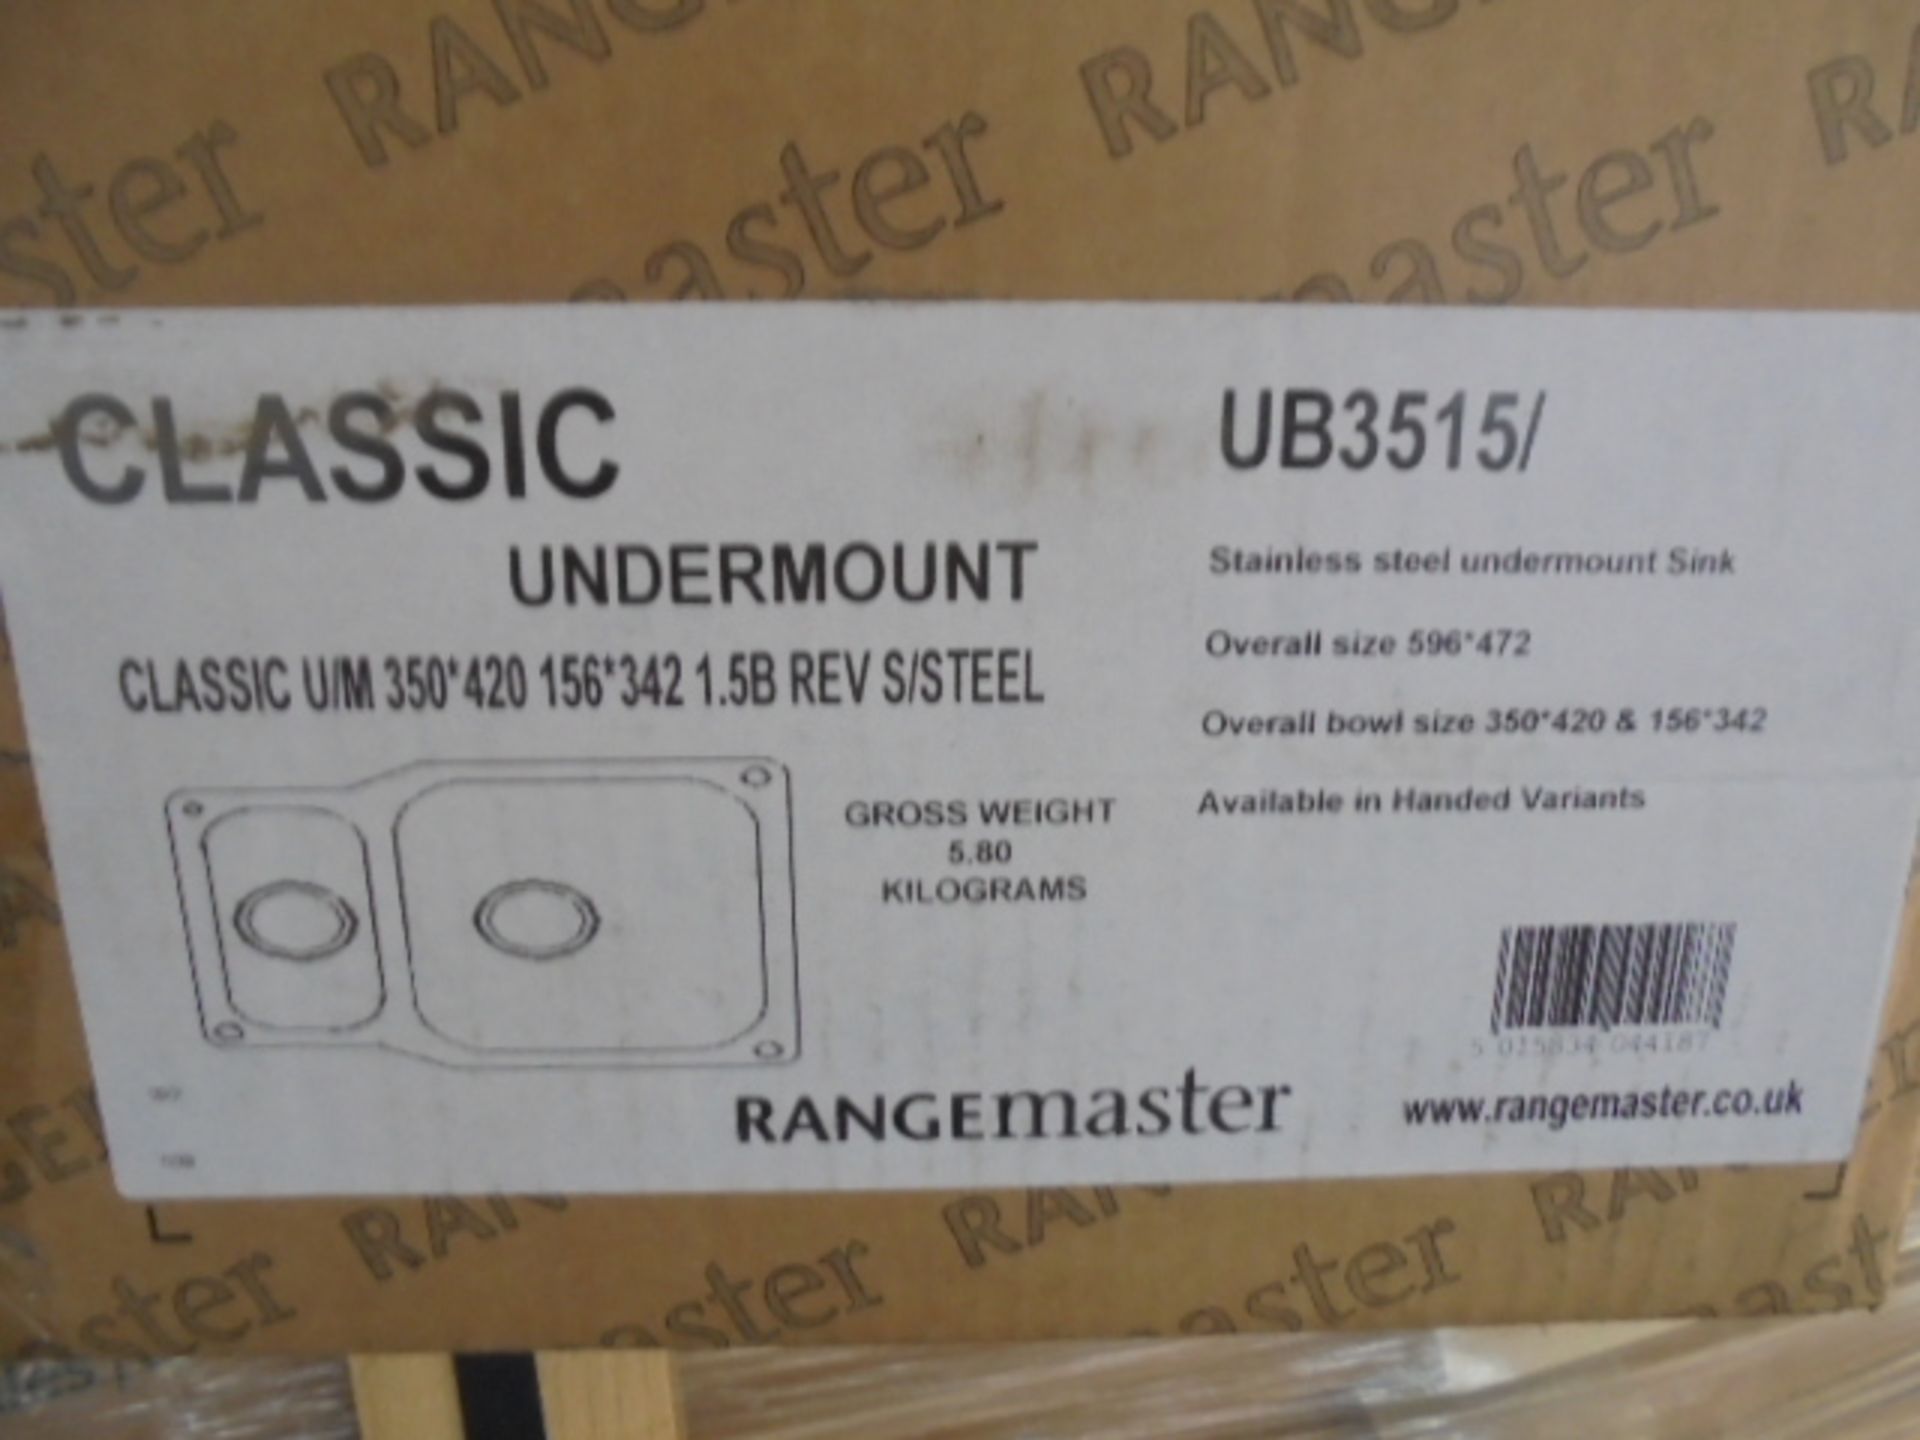 1 Rangemaster Classic Stainless Steel Twin Bowl Undermount Sink - Image 3 of 3